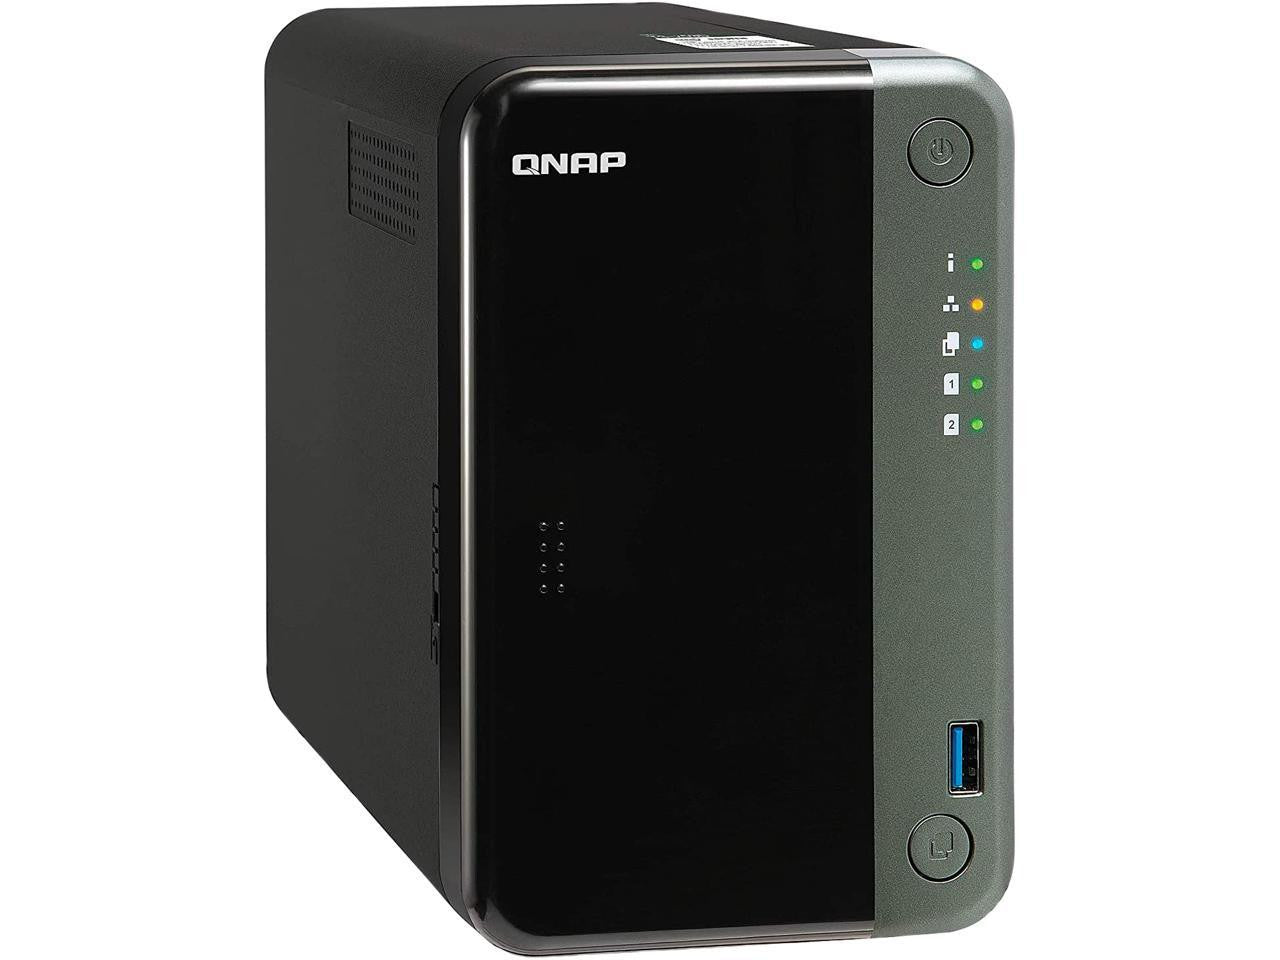 QNAP TS-253D Quad Core 2.7Ghz 2-Bay NAS with 4GB RAM and 20TB (2 x 10TB) of Seagate Ironwolf NAS Drives Fully Assembled and Tested By CustomTechSales